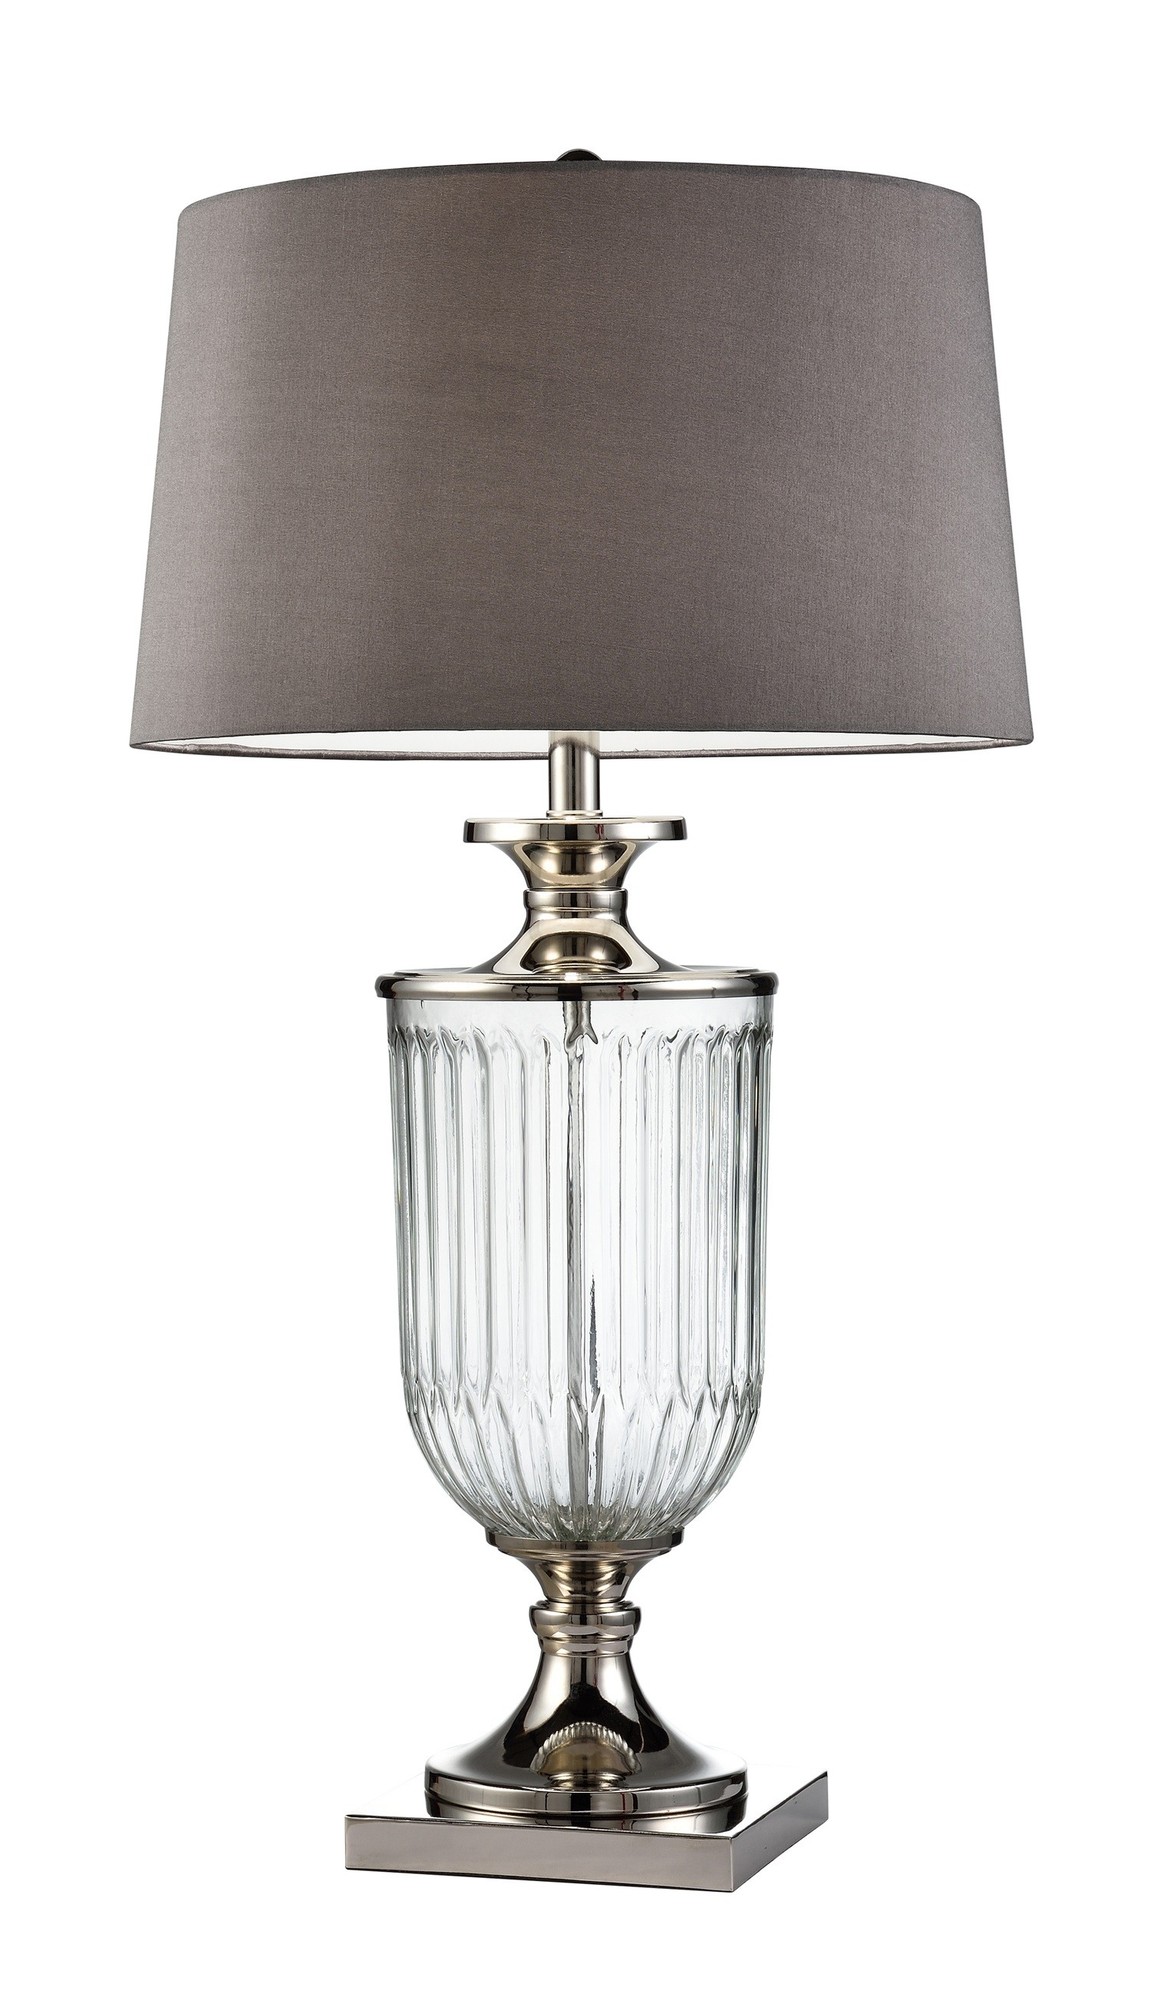 Glass Urn Table Lamp with Grey Fabric Shade